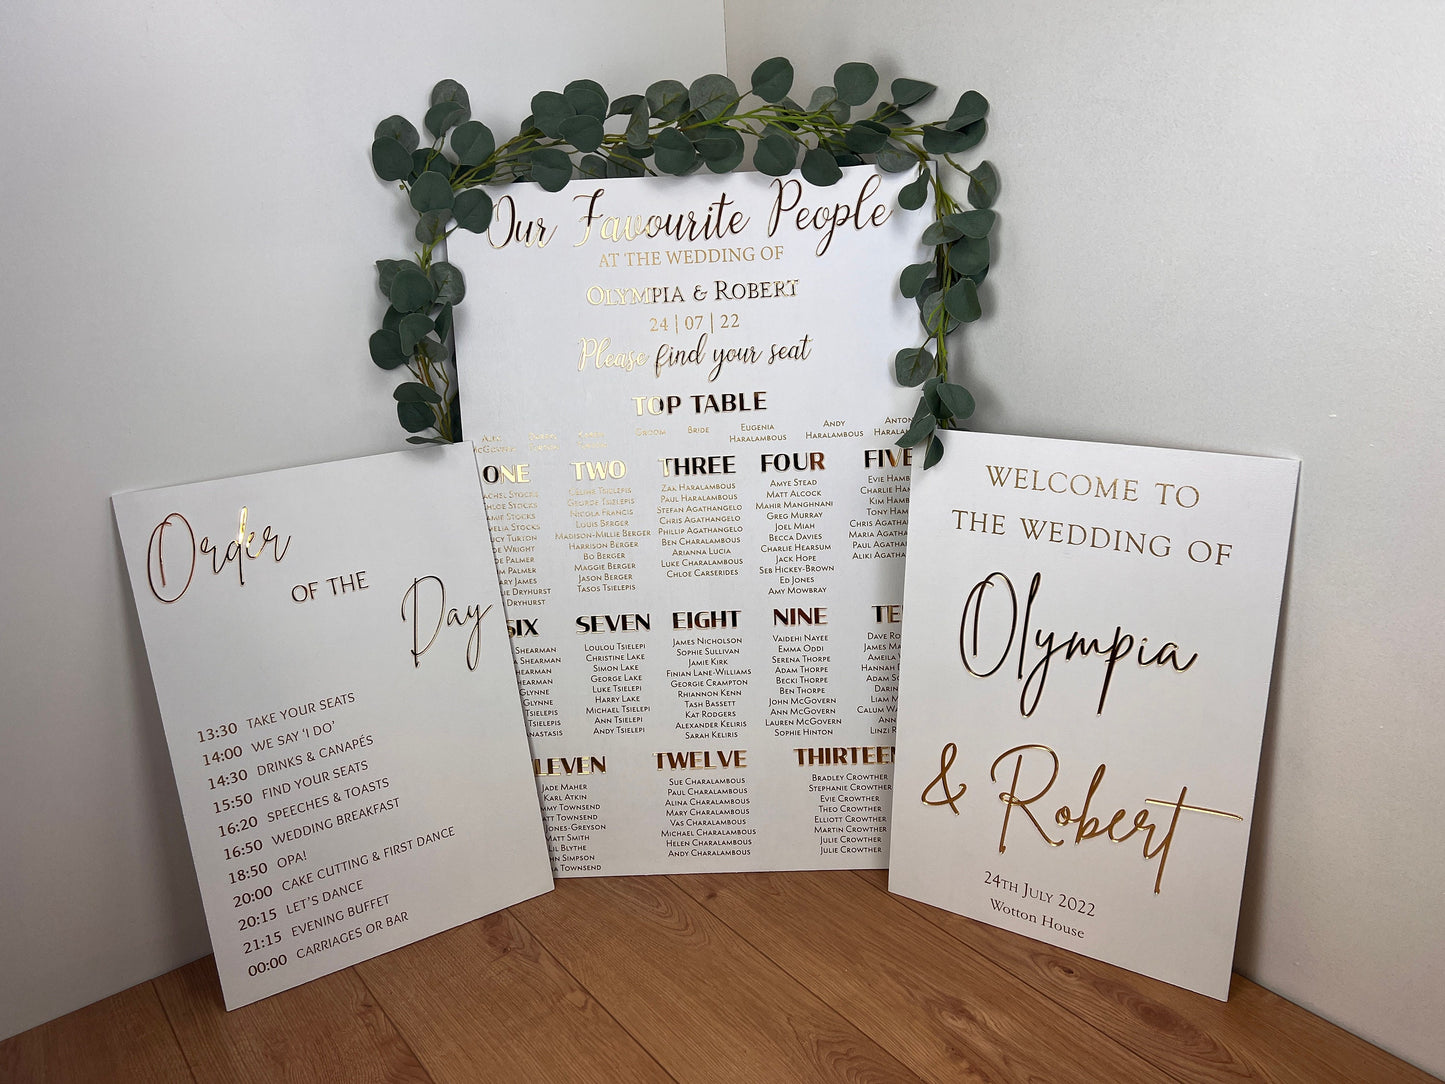 Elegant white and gold order of the day wedding sign with a clear and organized schedule of events, including ceremony and reception, hand-painted with high-quality materials and laser-engraved for a lasting keepsake. Perfect for guiding guests.